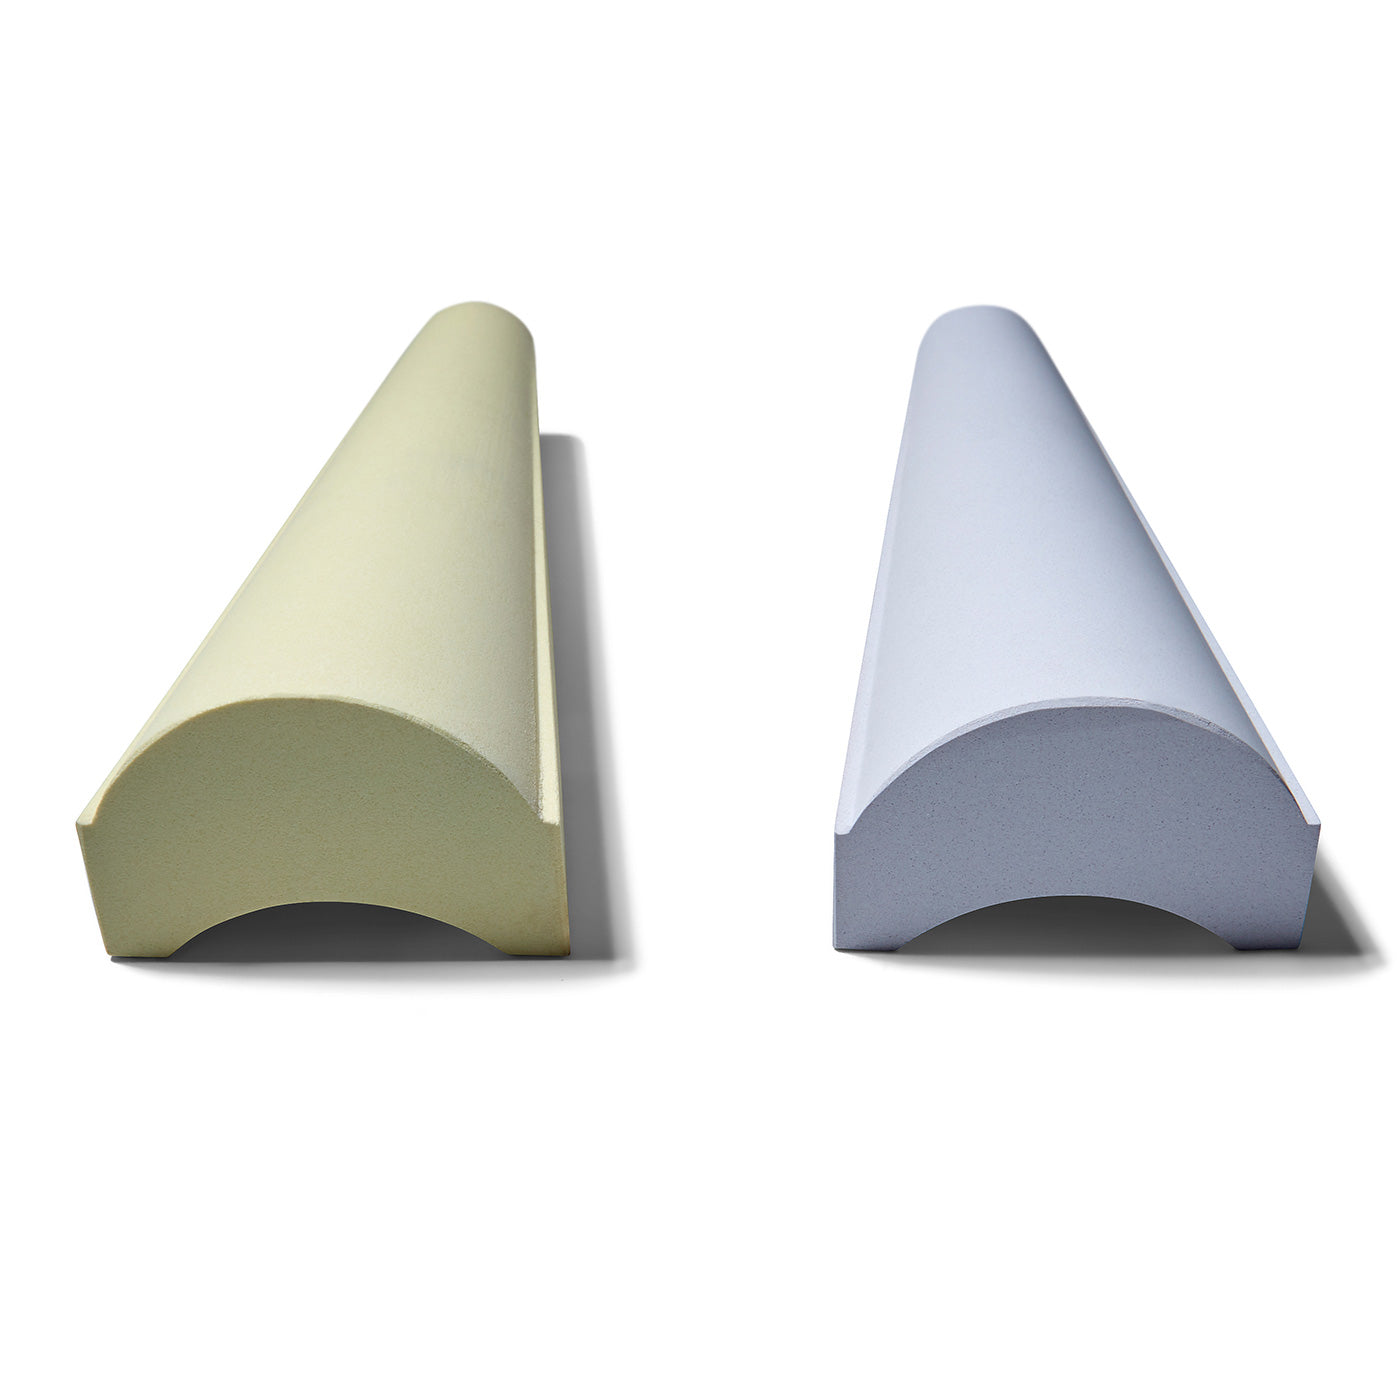 Conical Japanese Water Stones - Set of 2